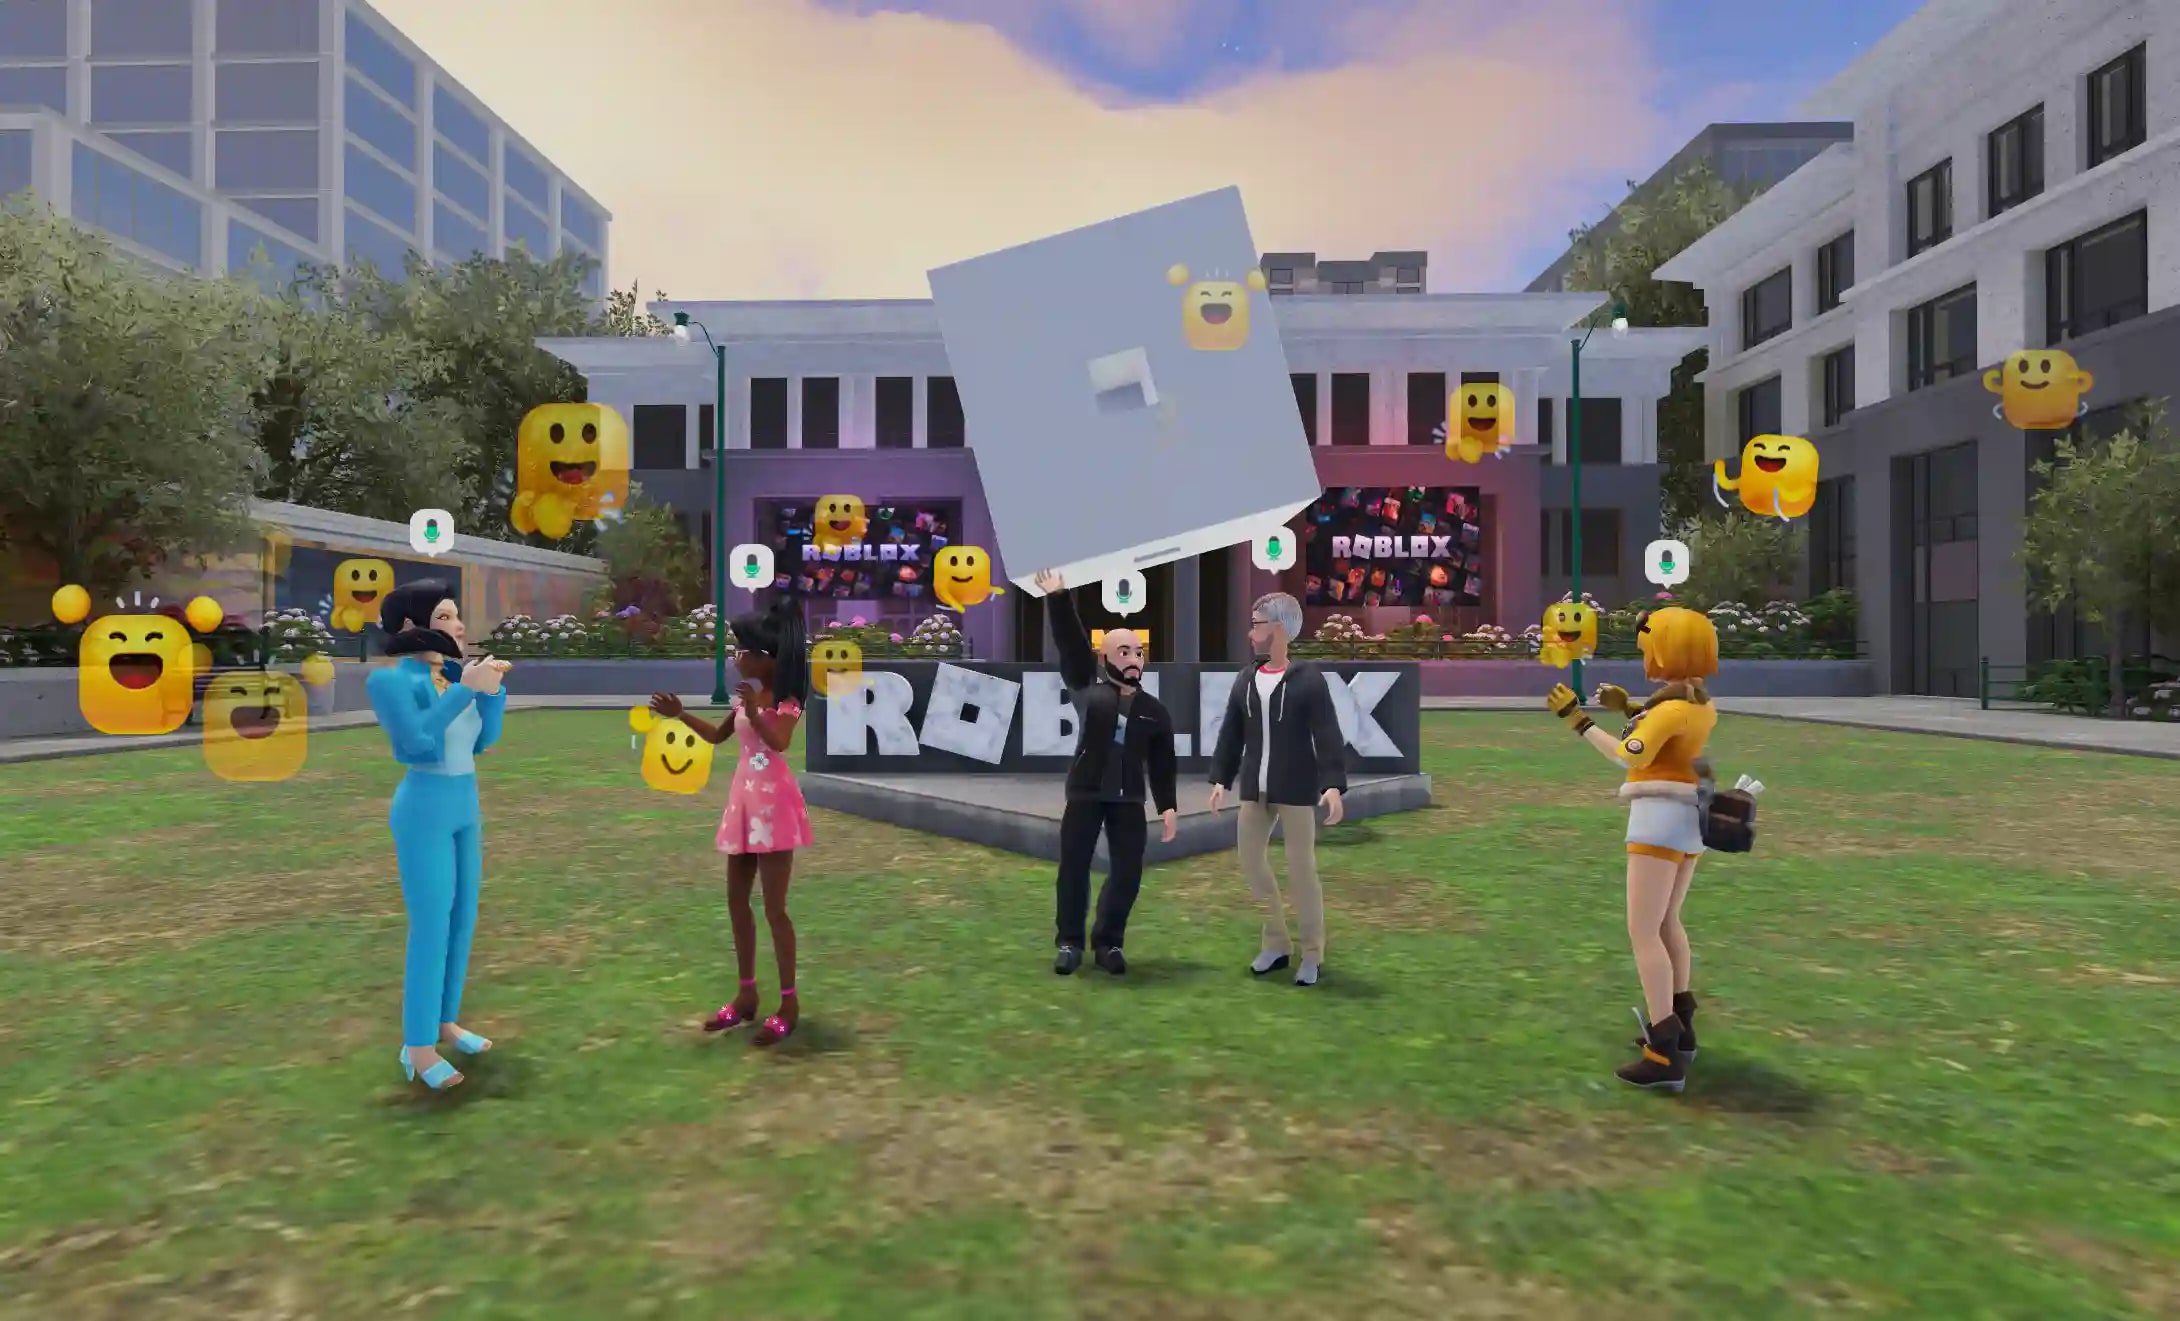 Roblox to launch 3D 'immersive' advertising in 2023